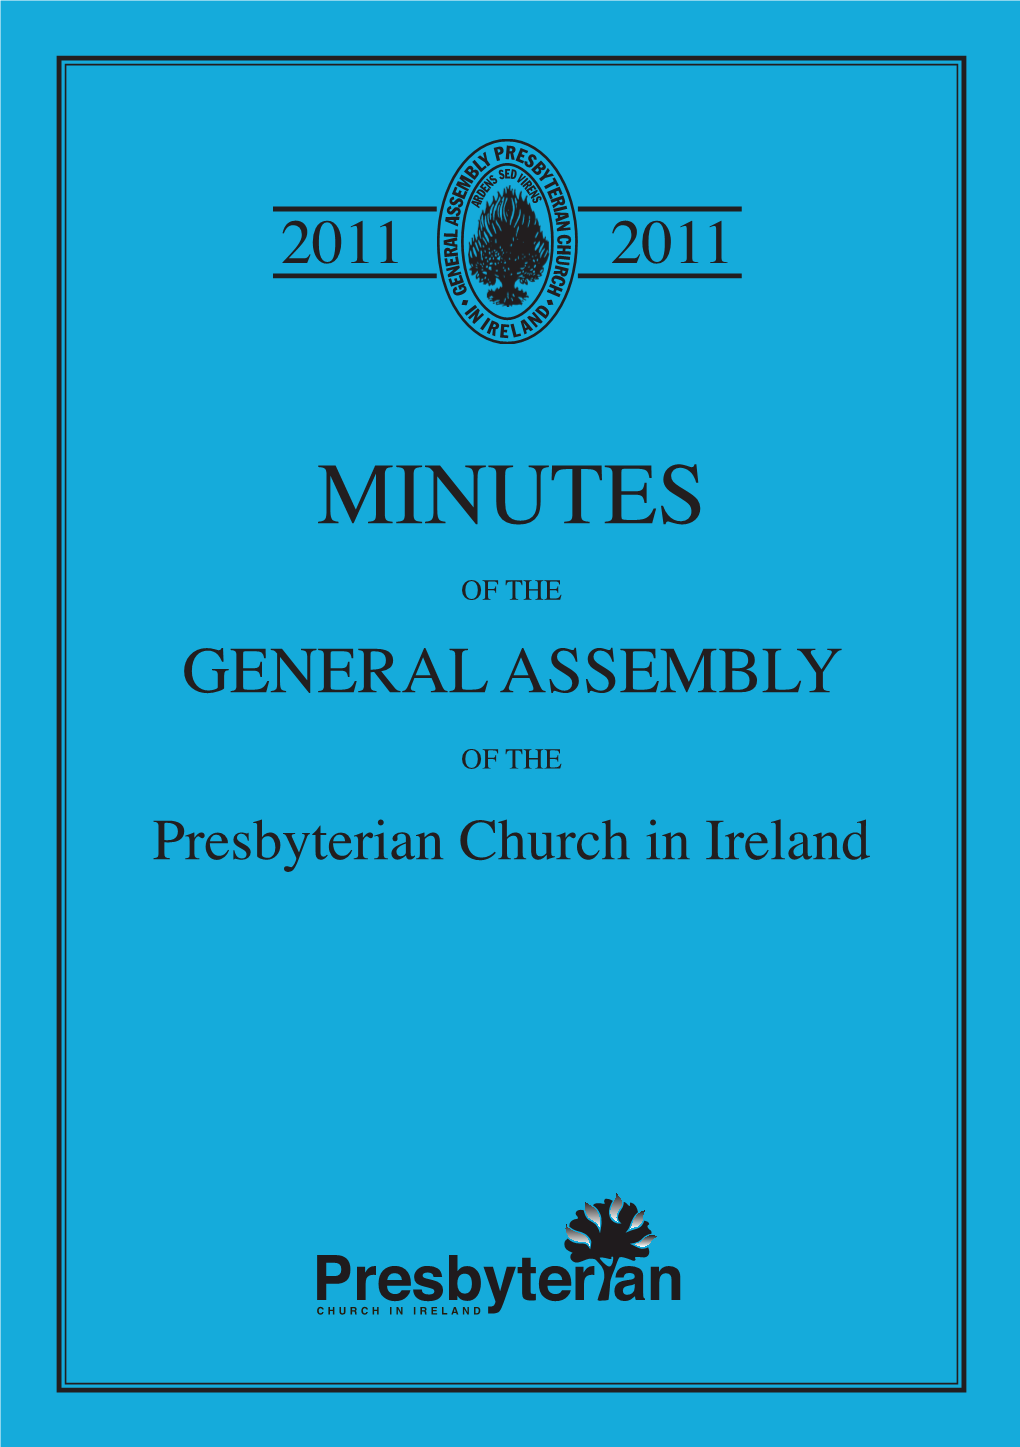 Minutes of the General Assembly 2011